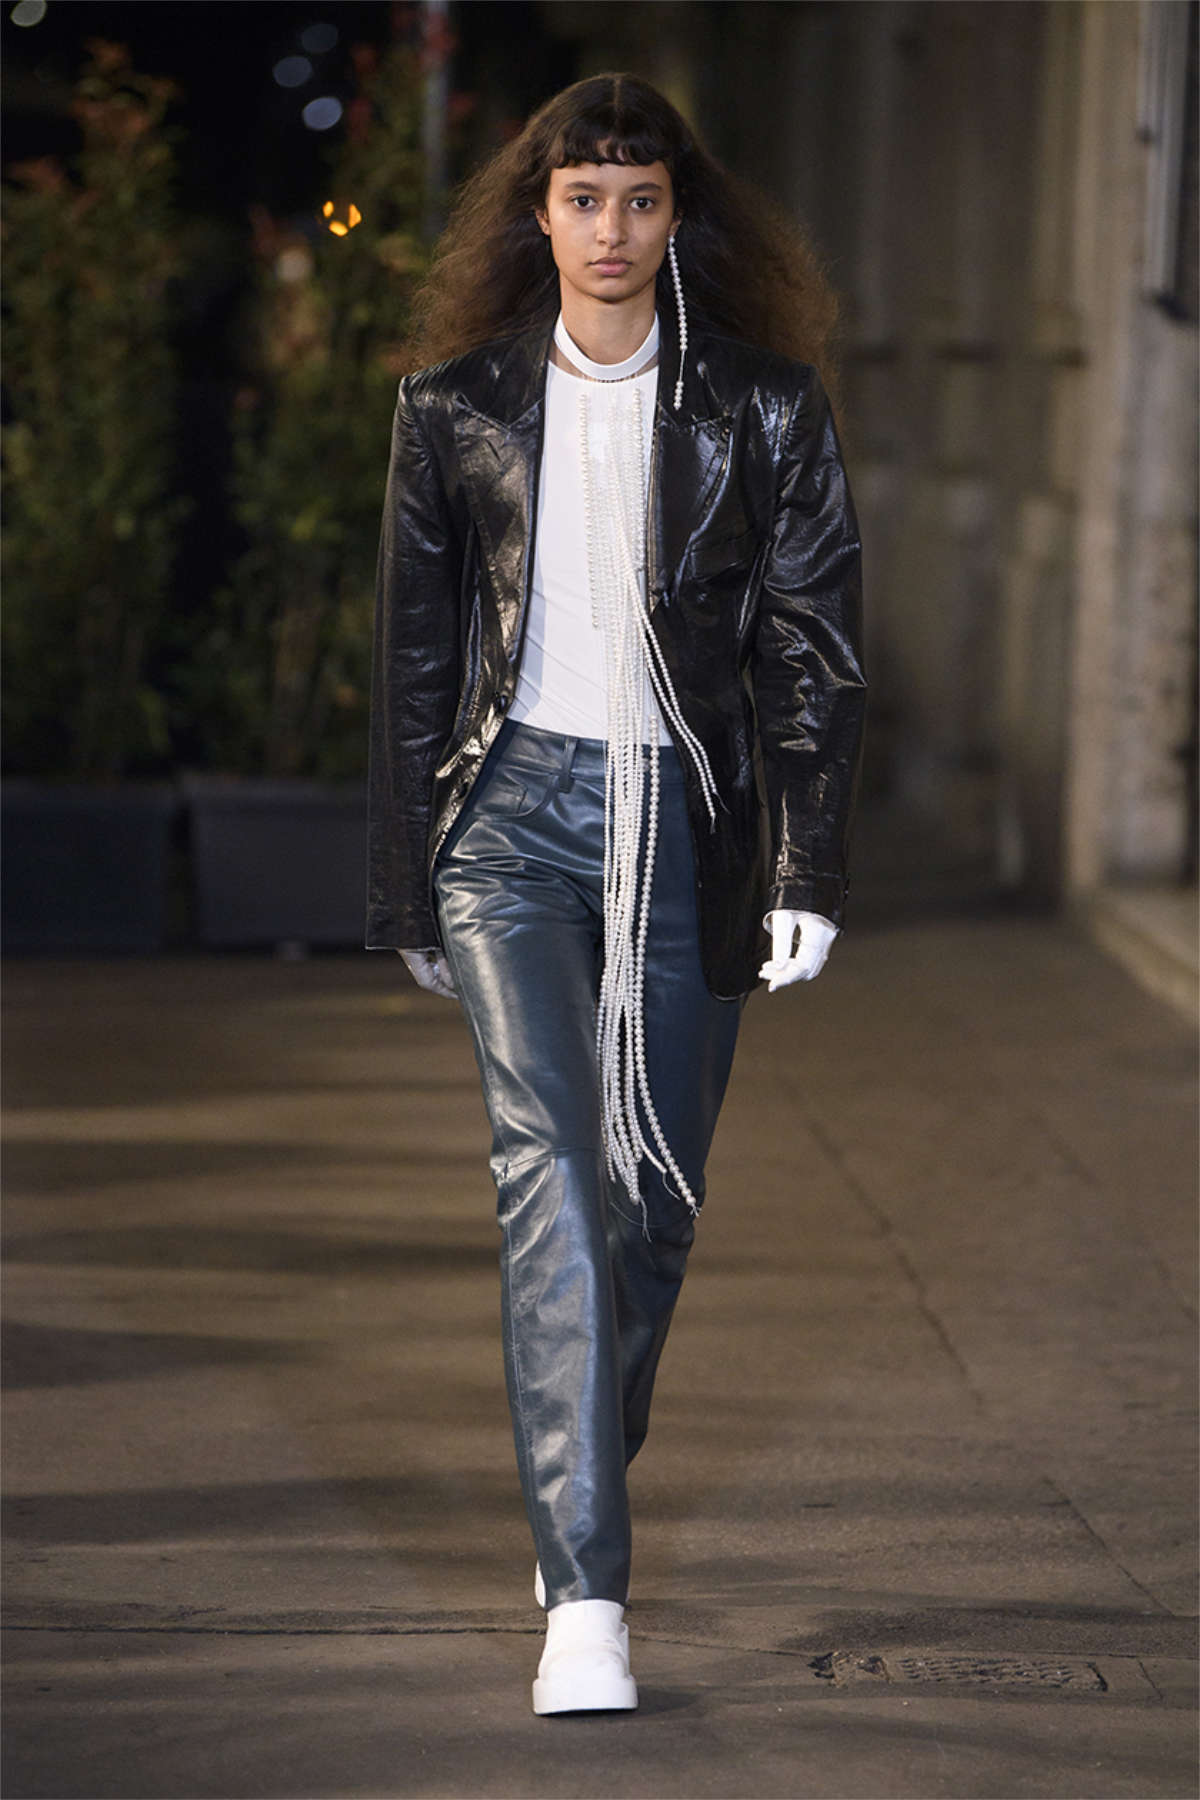 MM6 Maison Margiela Presents Its New Spring Summer 2022 Collection